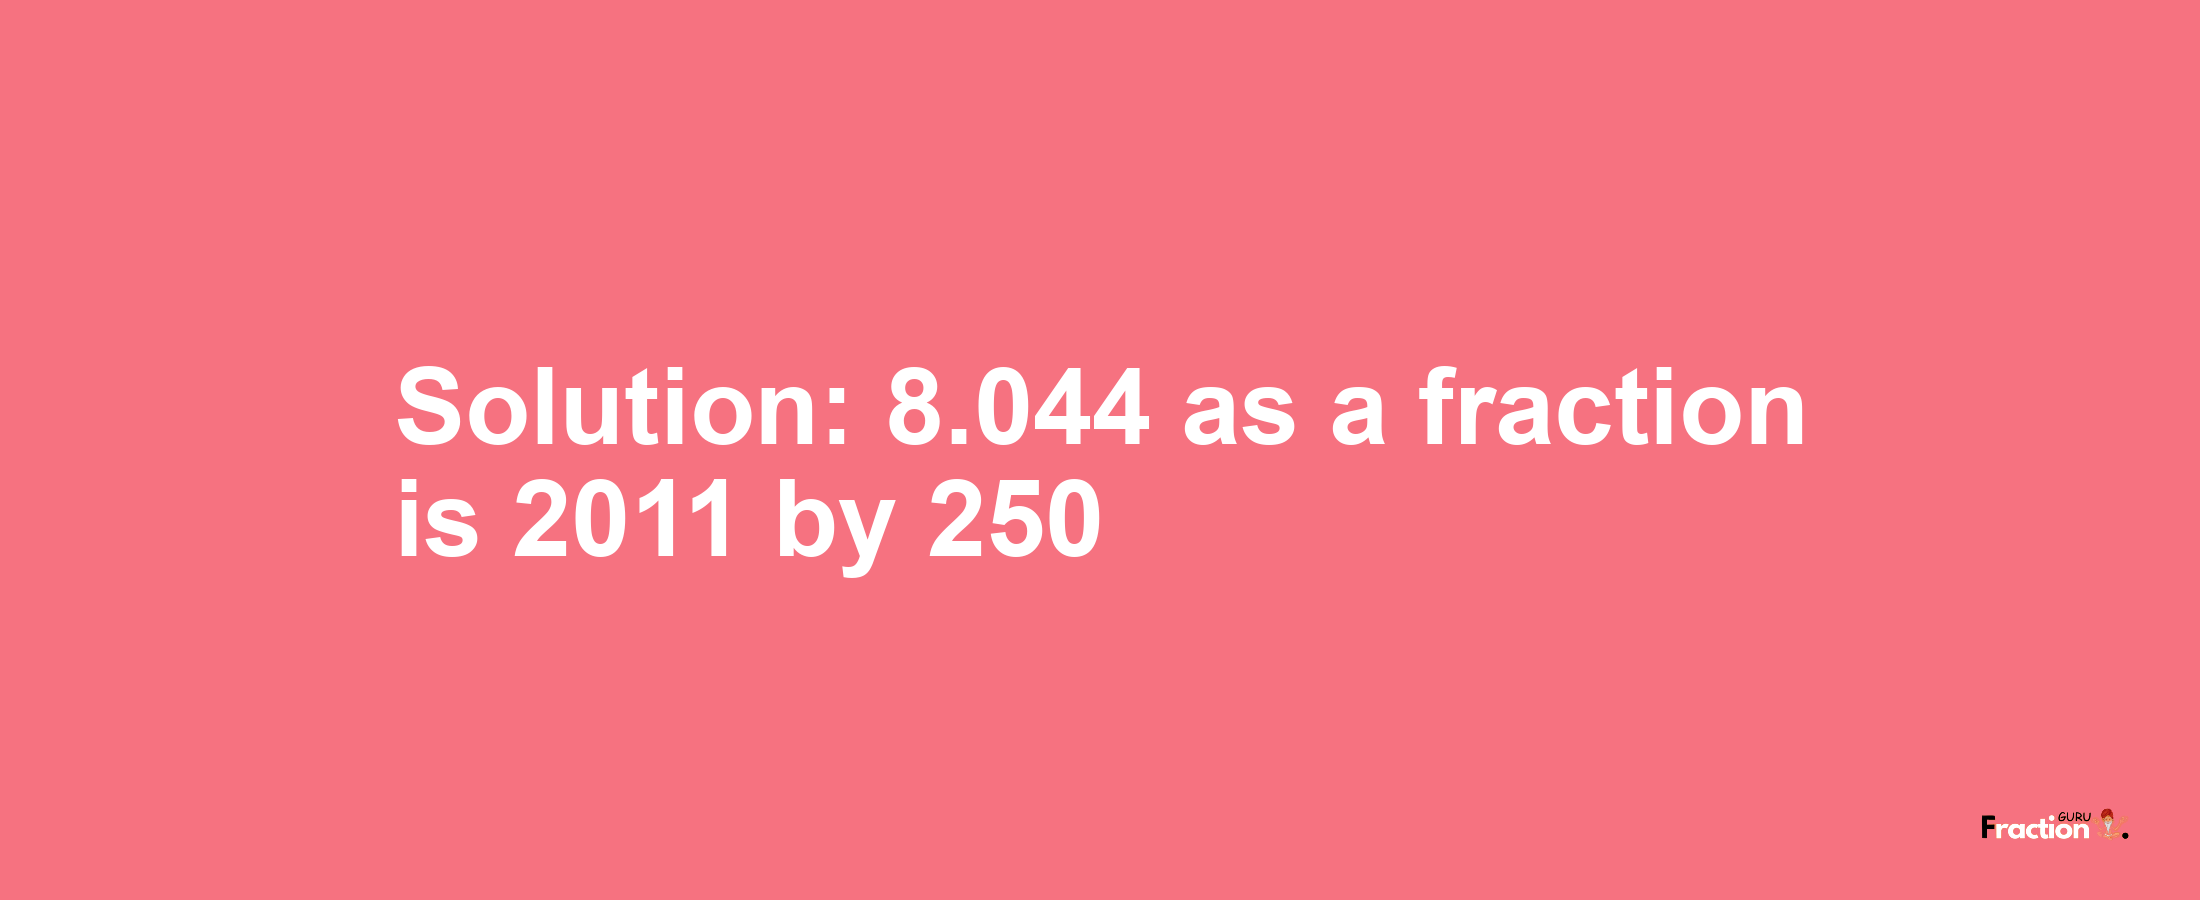 Solution:8.044 as a fraction is 2011/250